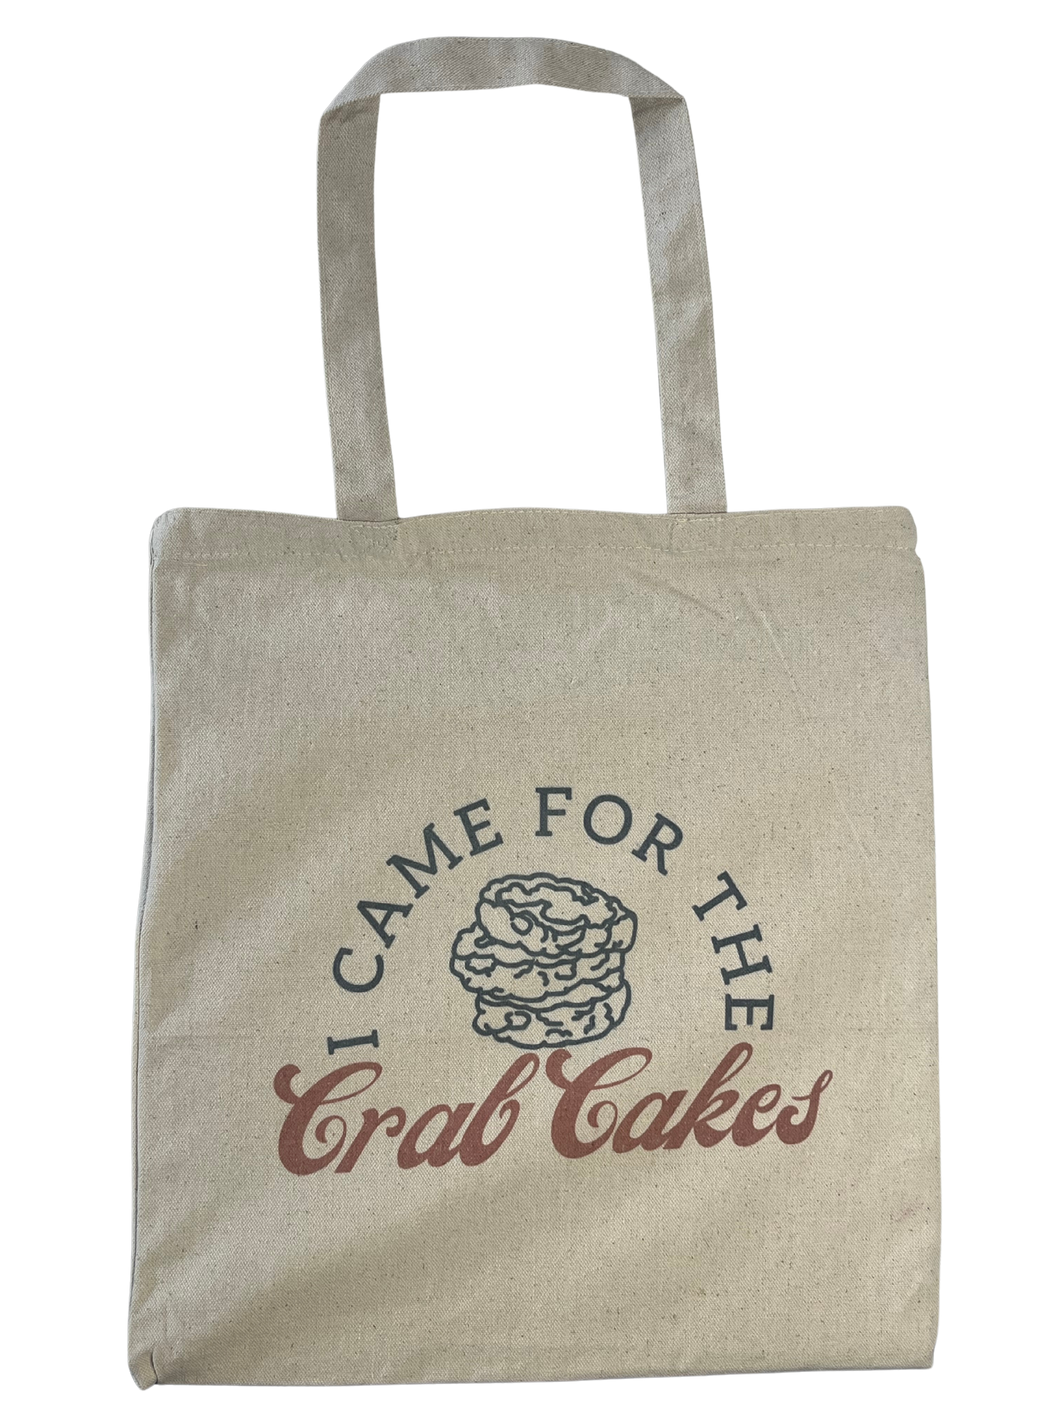 I Came for the Crabcakes Design Tote Bag